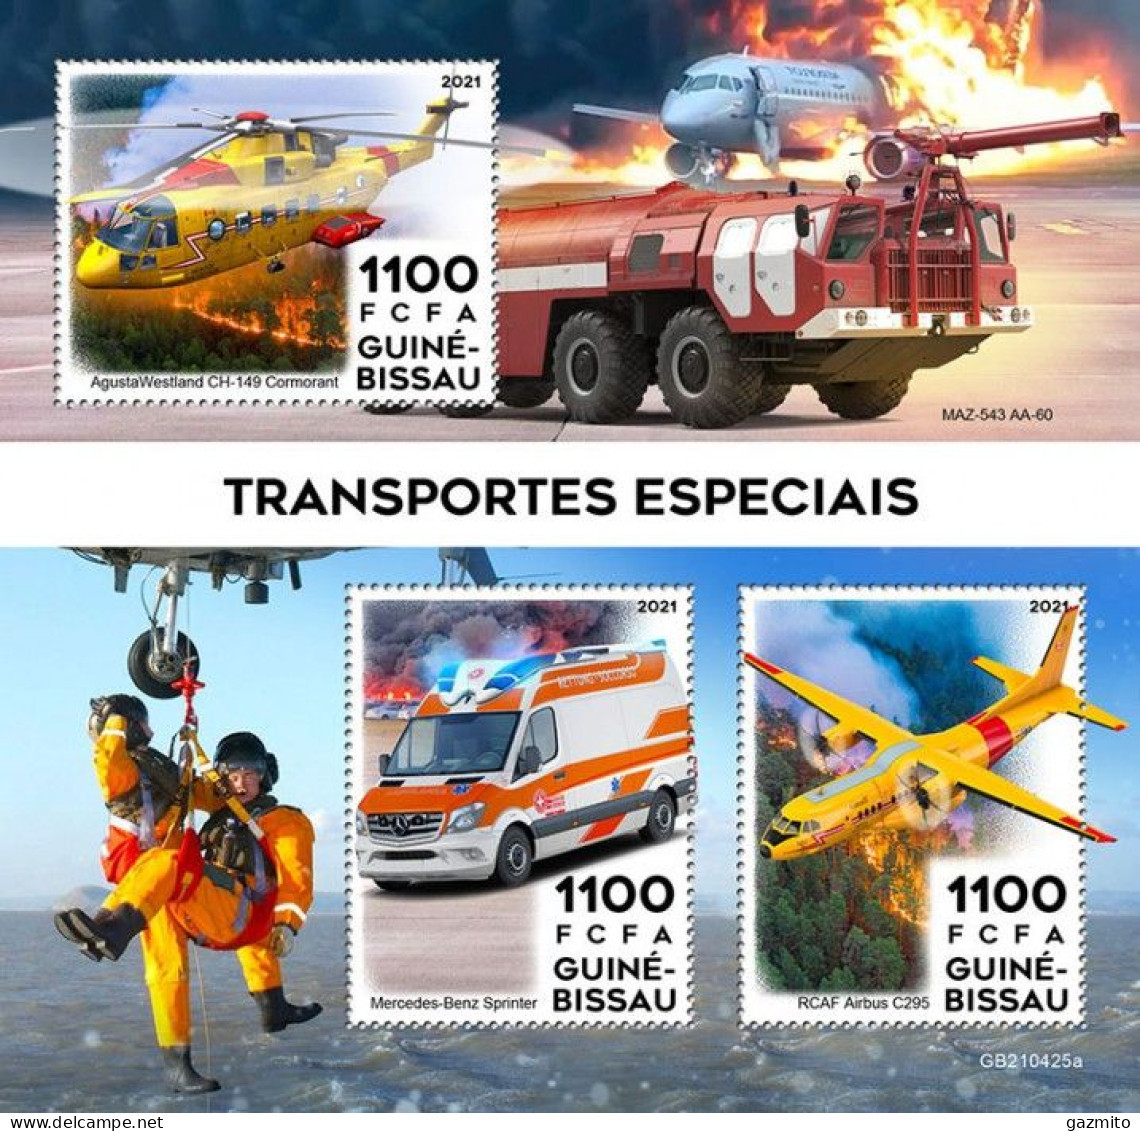 Guinea Bissau 2021, Transport, Helicopter, Plane, Fire Engine, Ambulance, 3val In BF - Sapeurs-Pompiers